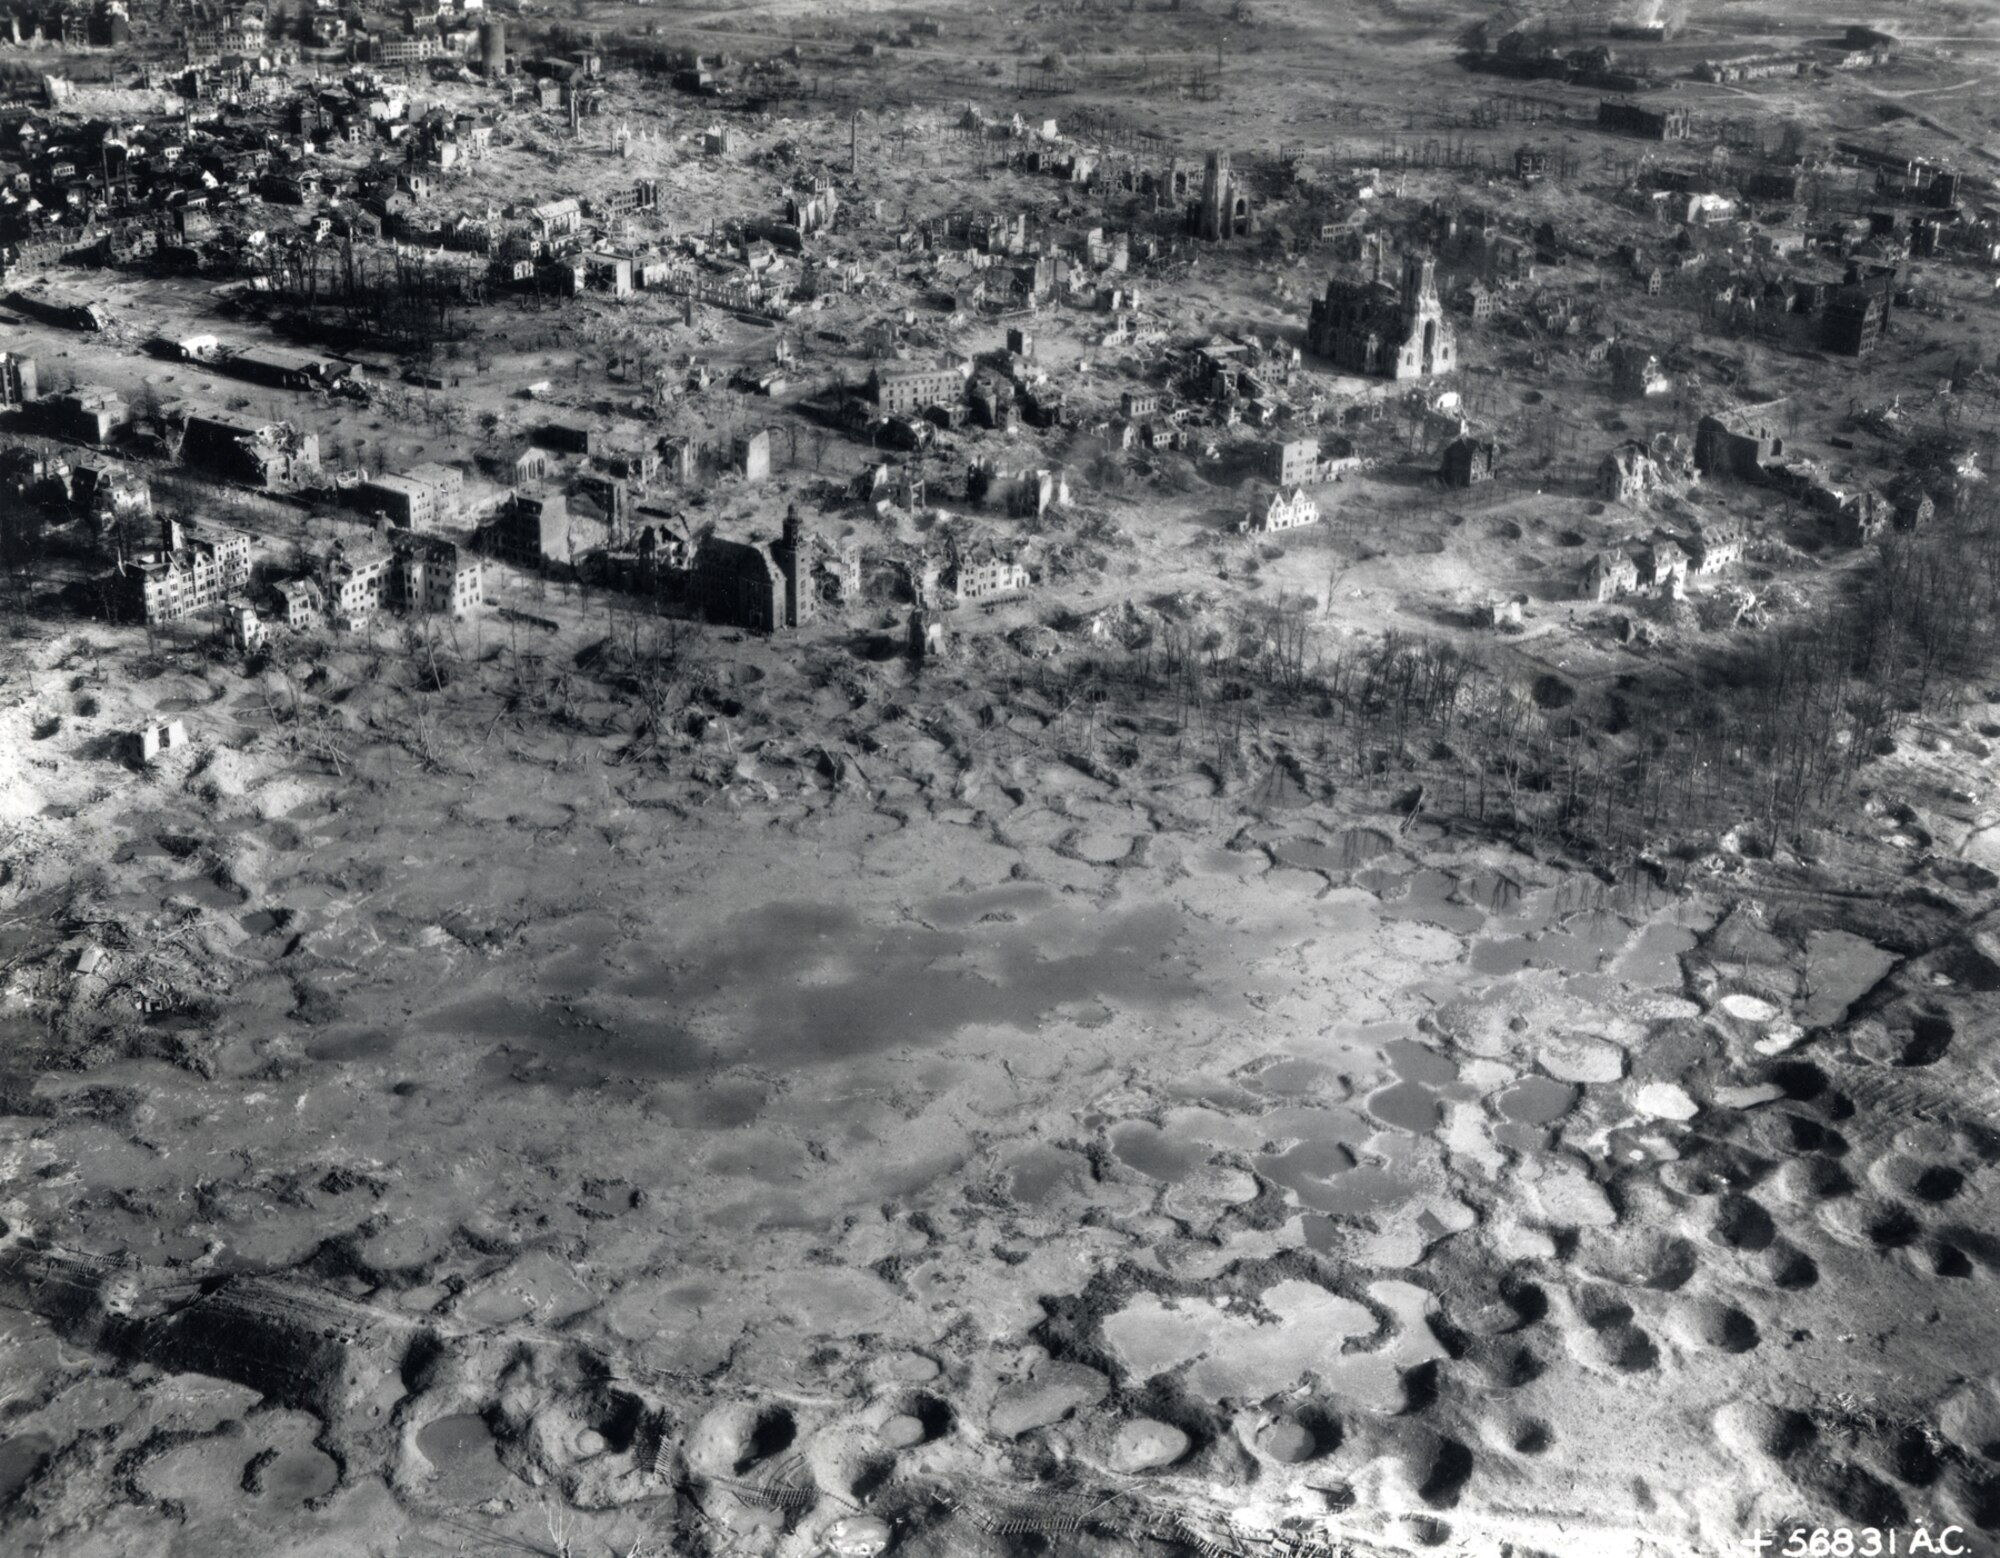 Ruins of Wesel, Germany, devastated by Allied bombing in preparation for the crossing of the Rhine on March 22-23, 1945. (U.S. Air Force photo)